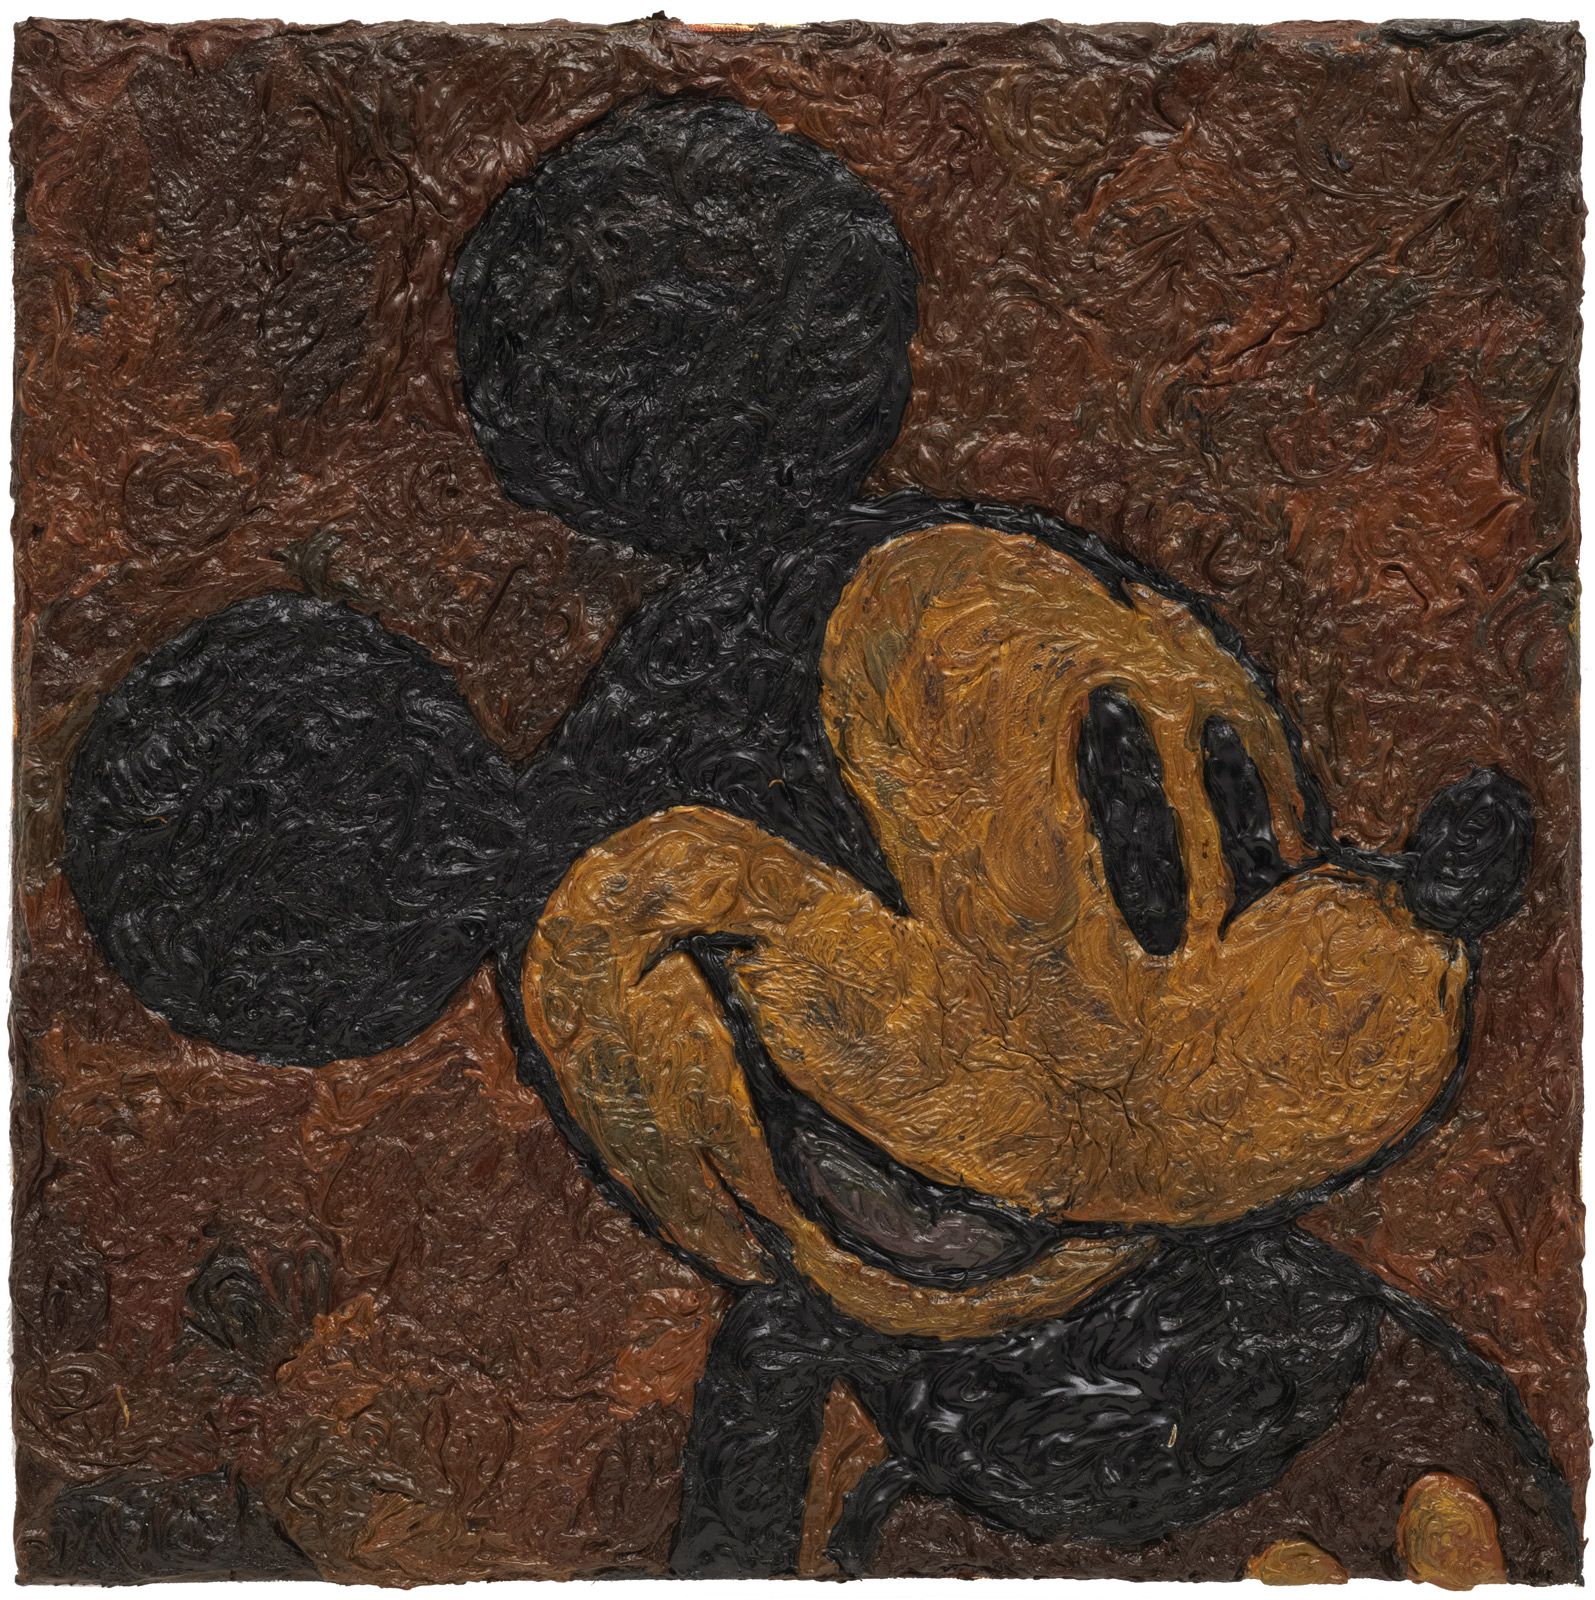 Study of Mickey Mouse painting by Mark Alexander in dark colours.